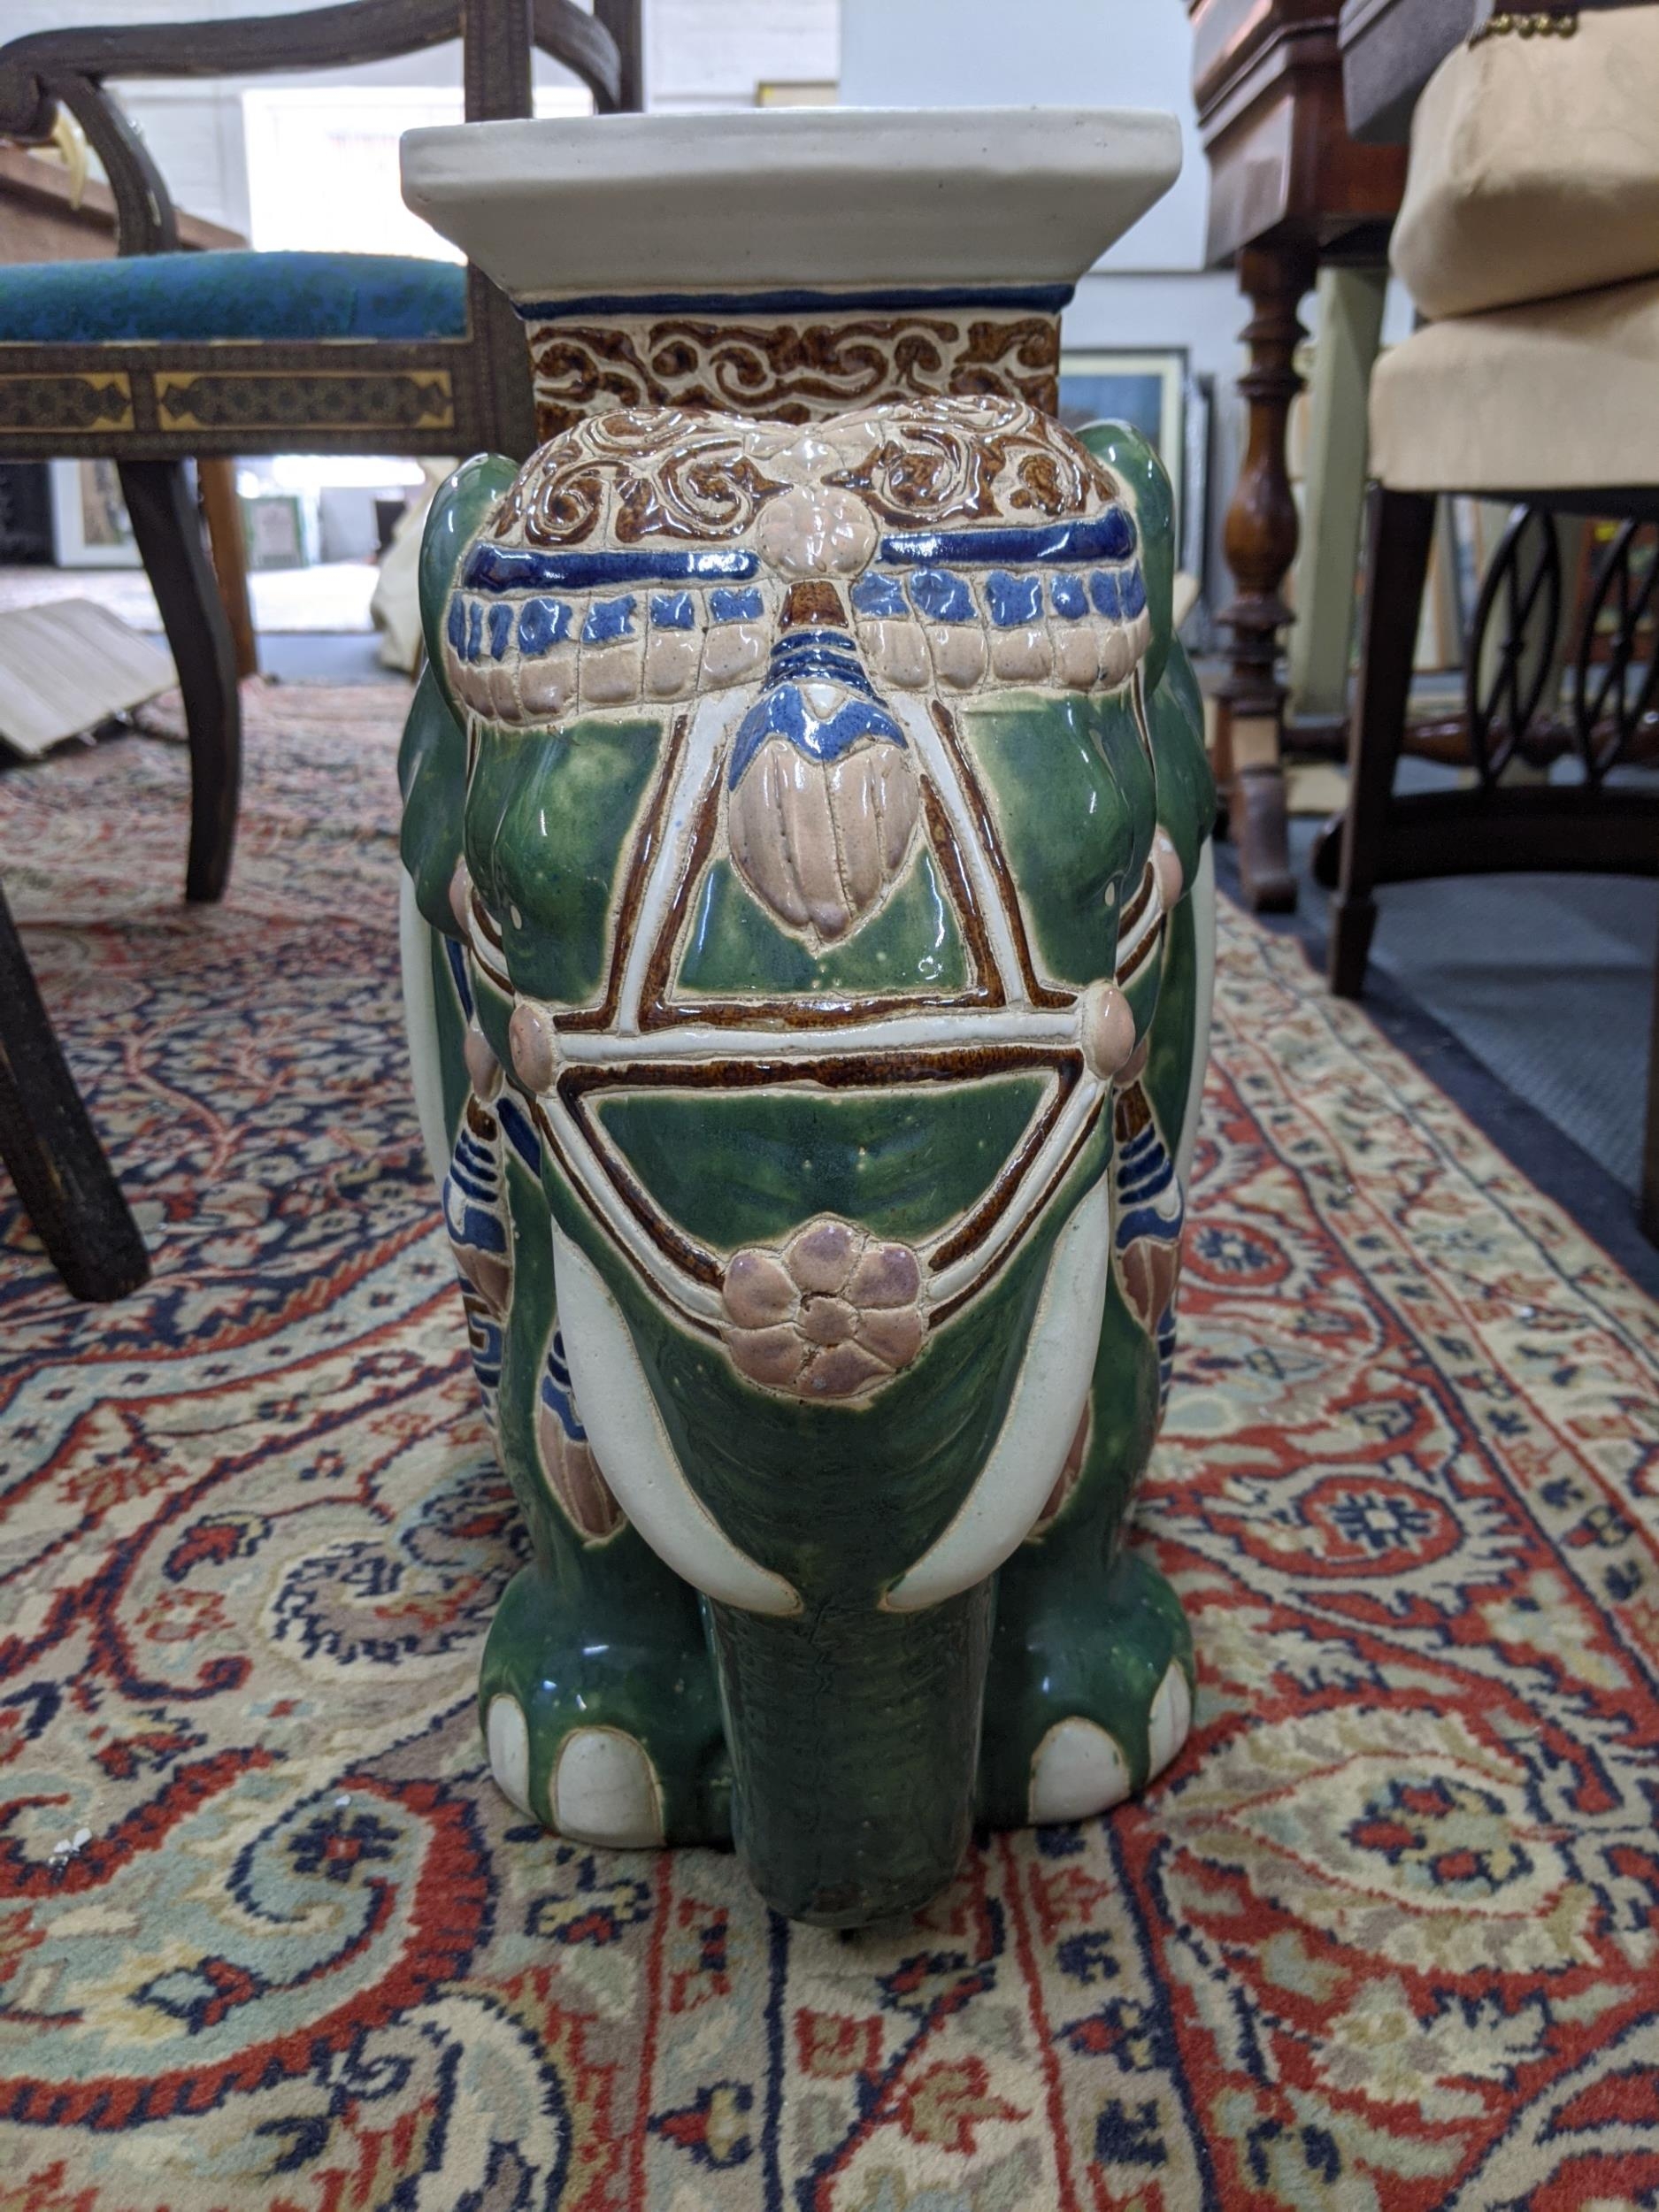 A 20th century conservatory stool fashioned as an elephant draped in Indian textiles and finery - Image 2 of 6